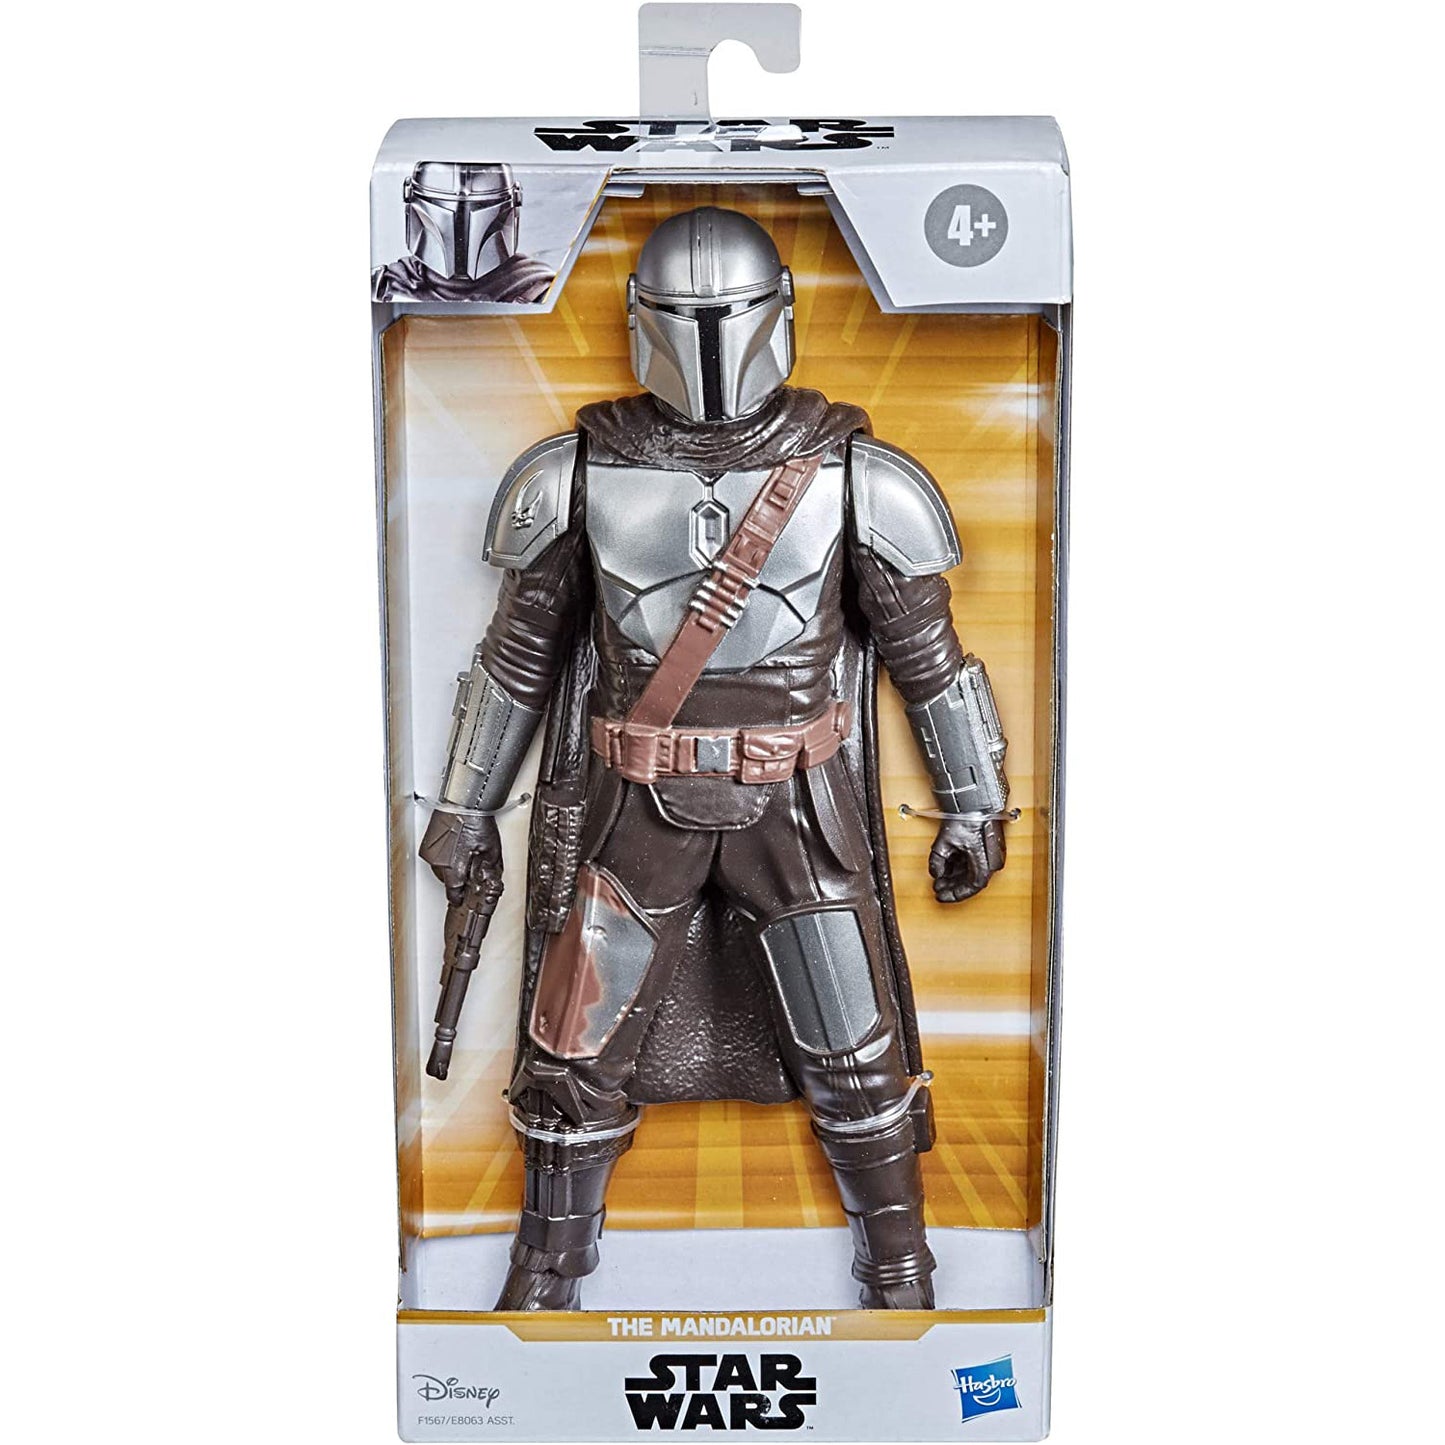 Star Wars The Mandalorian - 9.5" Deluxe Olympus Action Figure